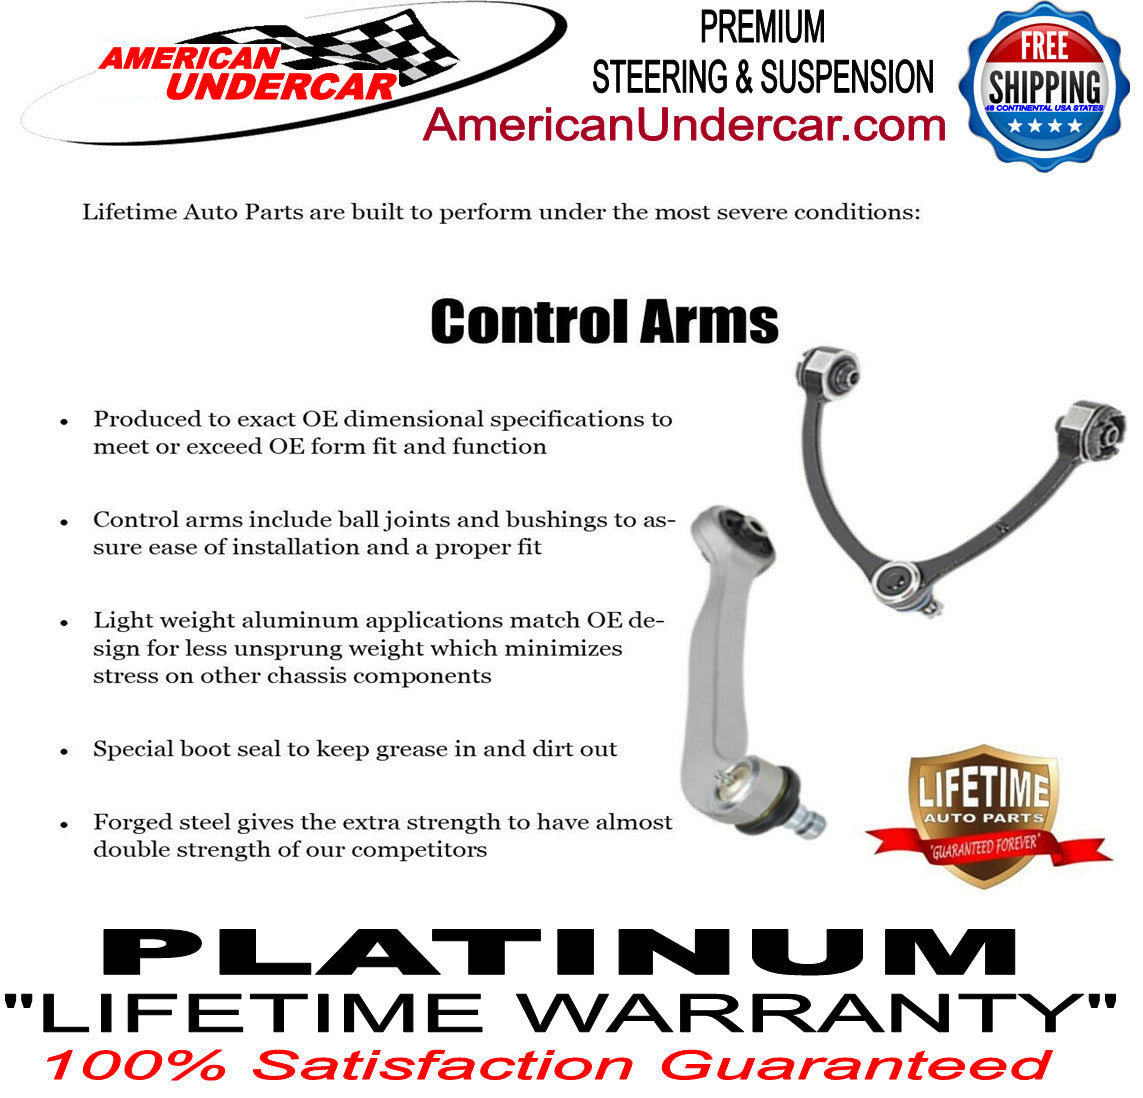 Lifetime Ball Joint Tie Rod Drag Link Steering Kit for 1999-2004 Ford F450, F550 Super Duty